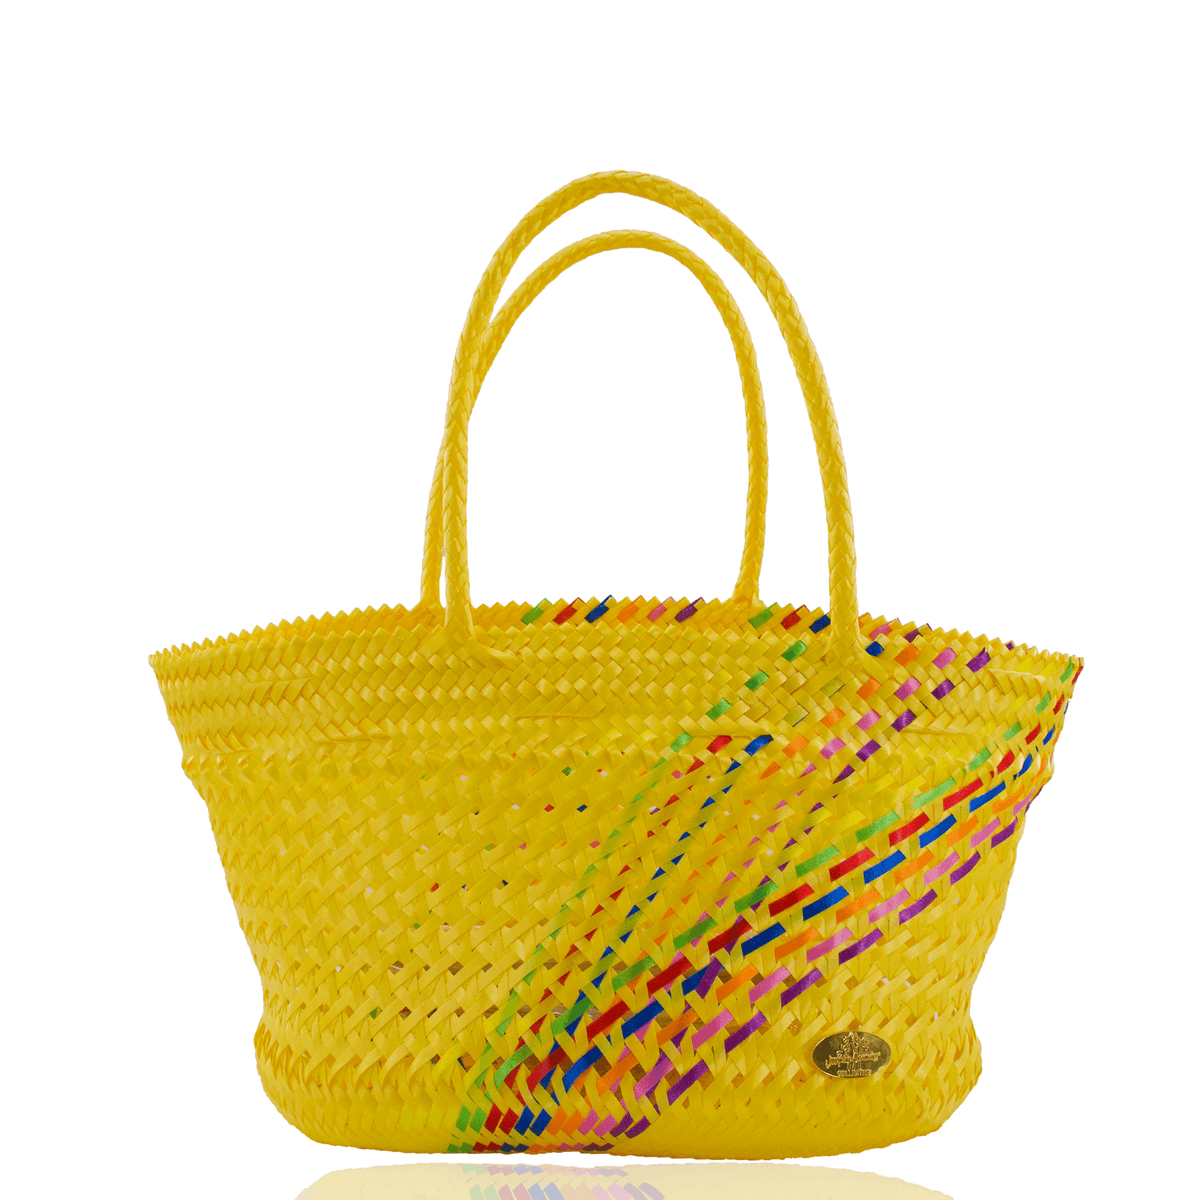 Amelia Basket Bag in Splash of Rainbow (More Colors Available) - Josephine Alexander Collective